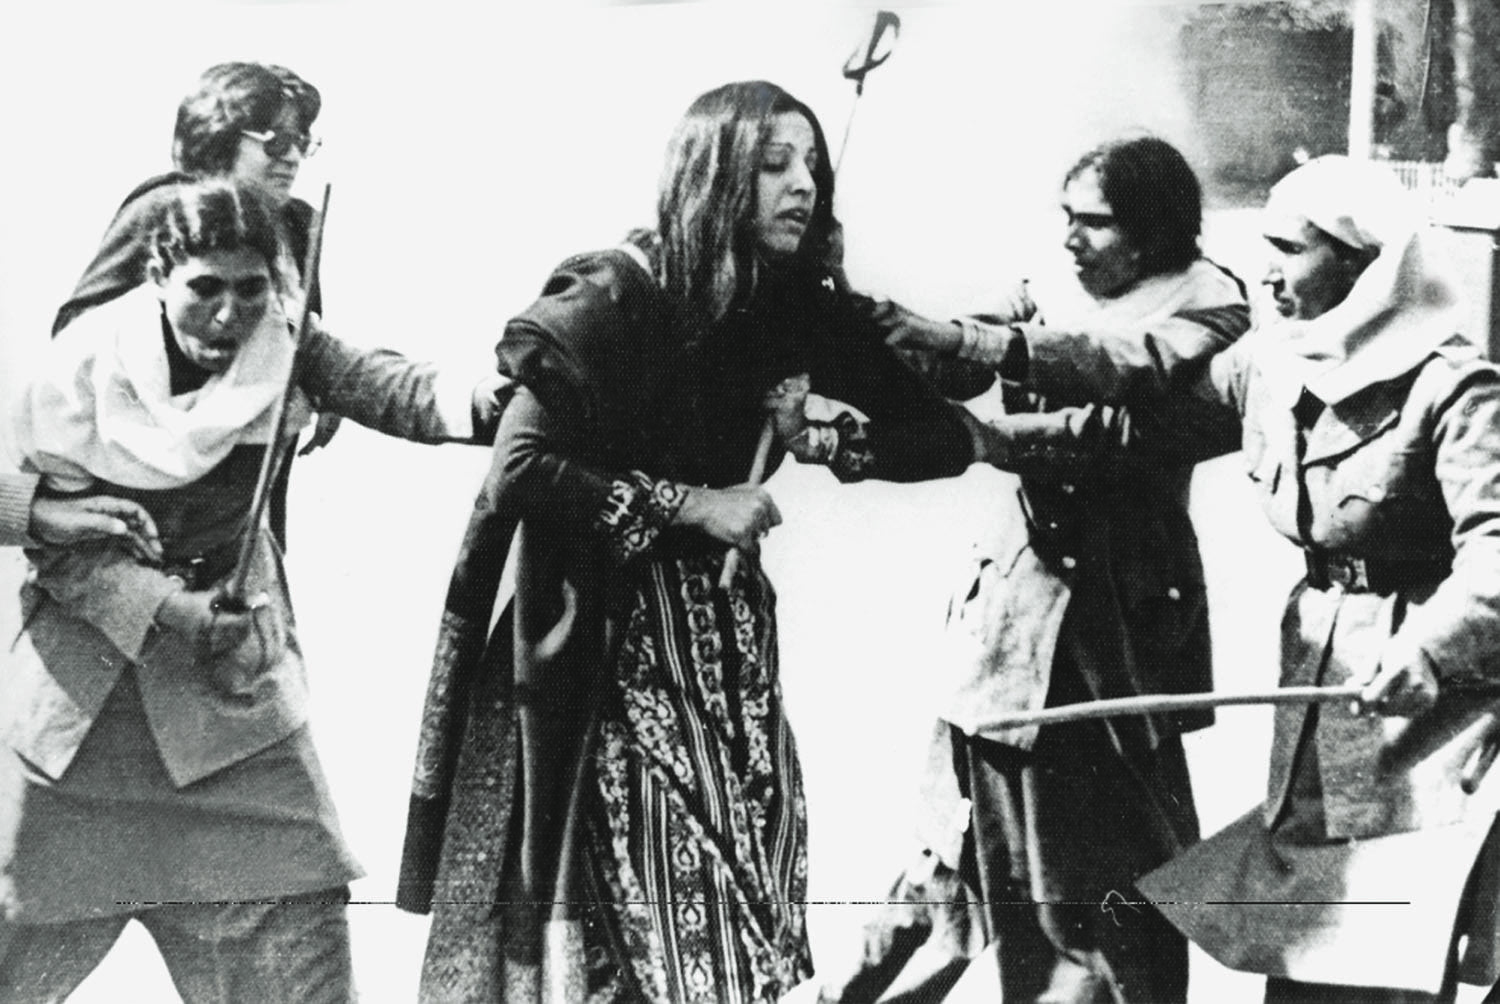 BUSHRA Aitzaz, a human rights activist, was one of the women who were arrested during a protest organised by the Women’s Action Forum in Lahore in February 1983. The protestors were subjected to brutal violence at the hands of policemen armed with batons and teargas.| Photo: Aitzaz Ahsan Archives.